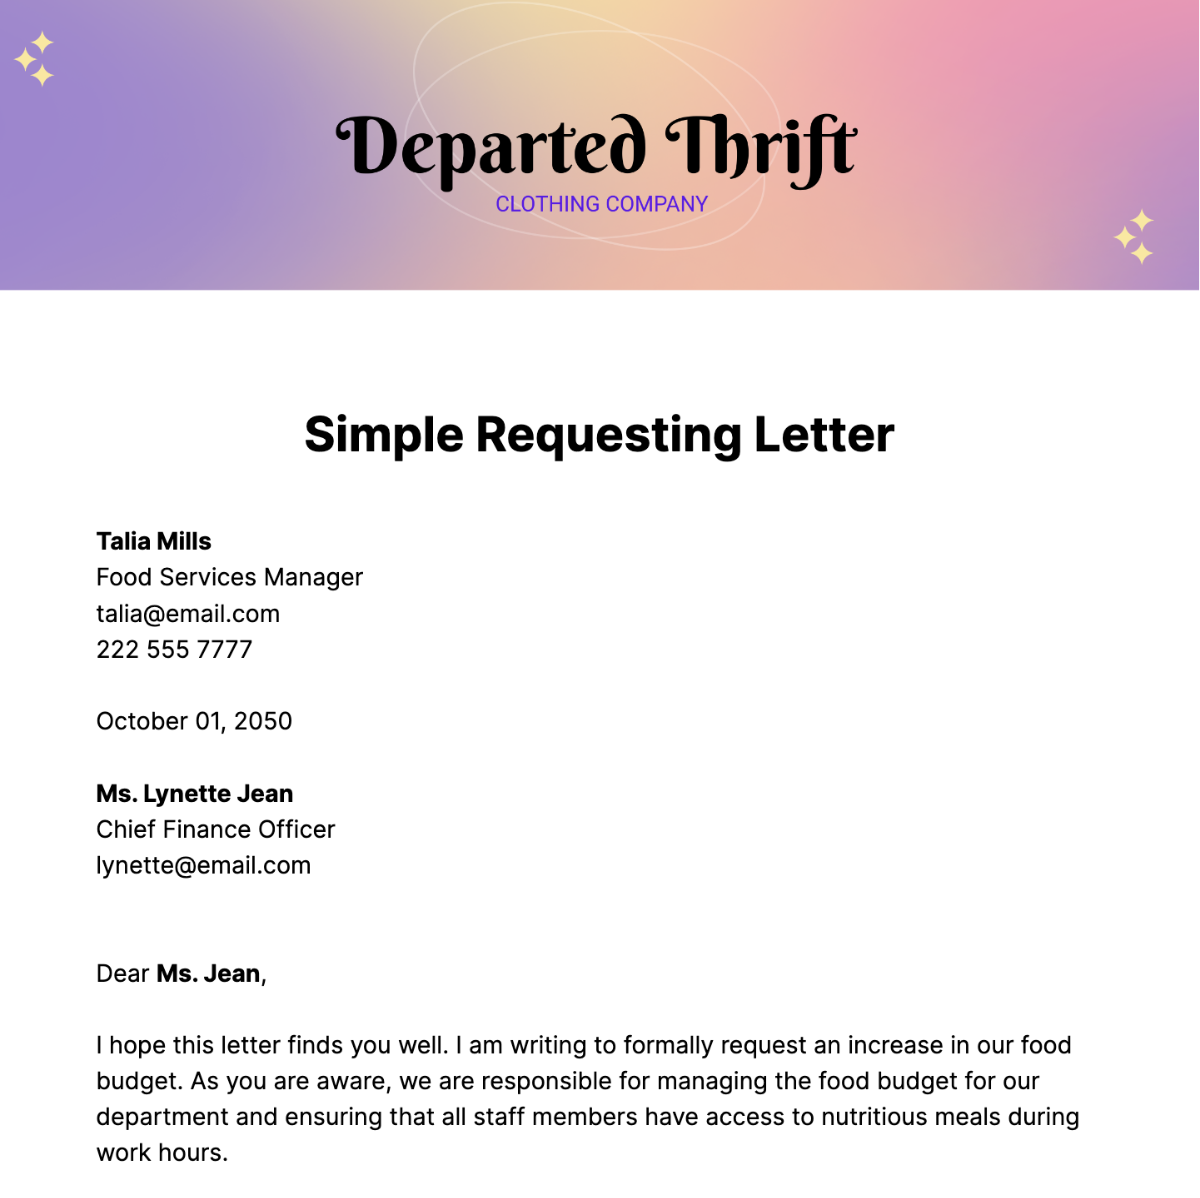 Simple Requesting Letter  Template